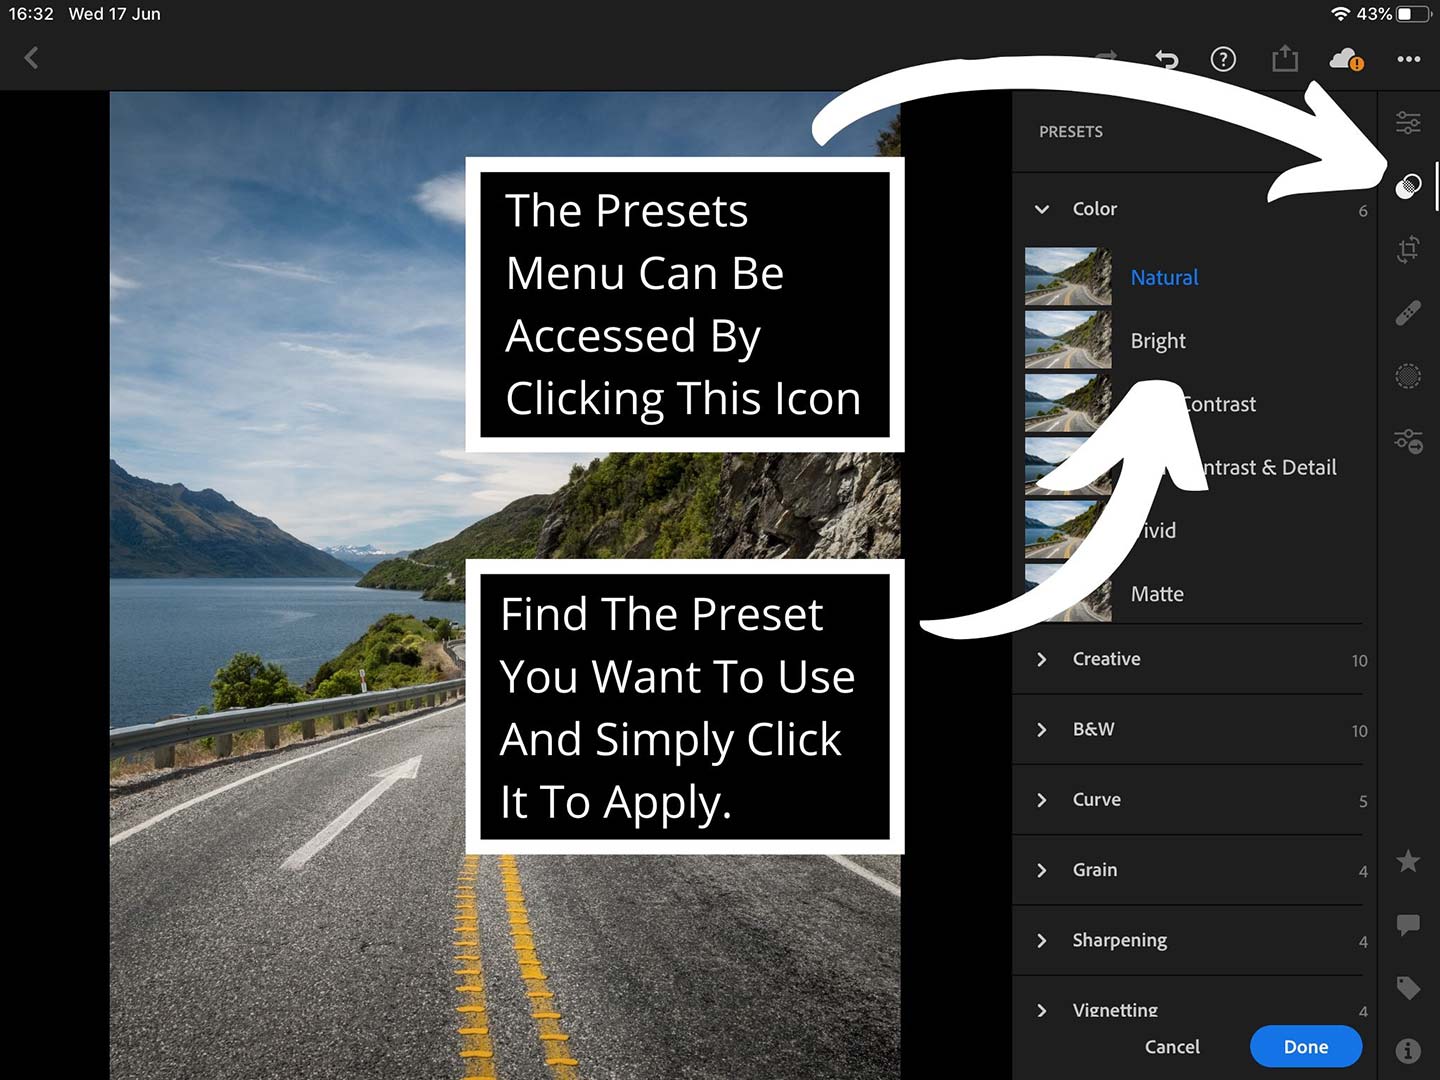 A printscreen that demonstrates how to apply a preset using the Lightroom mobile application an important part of this Lightroom presets guide.